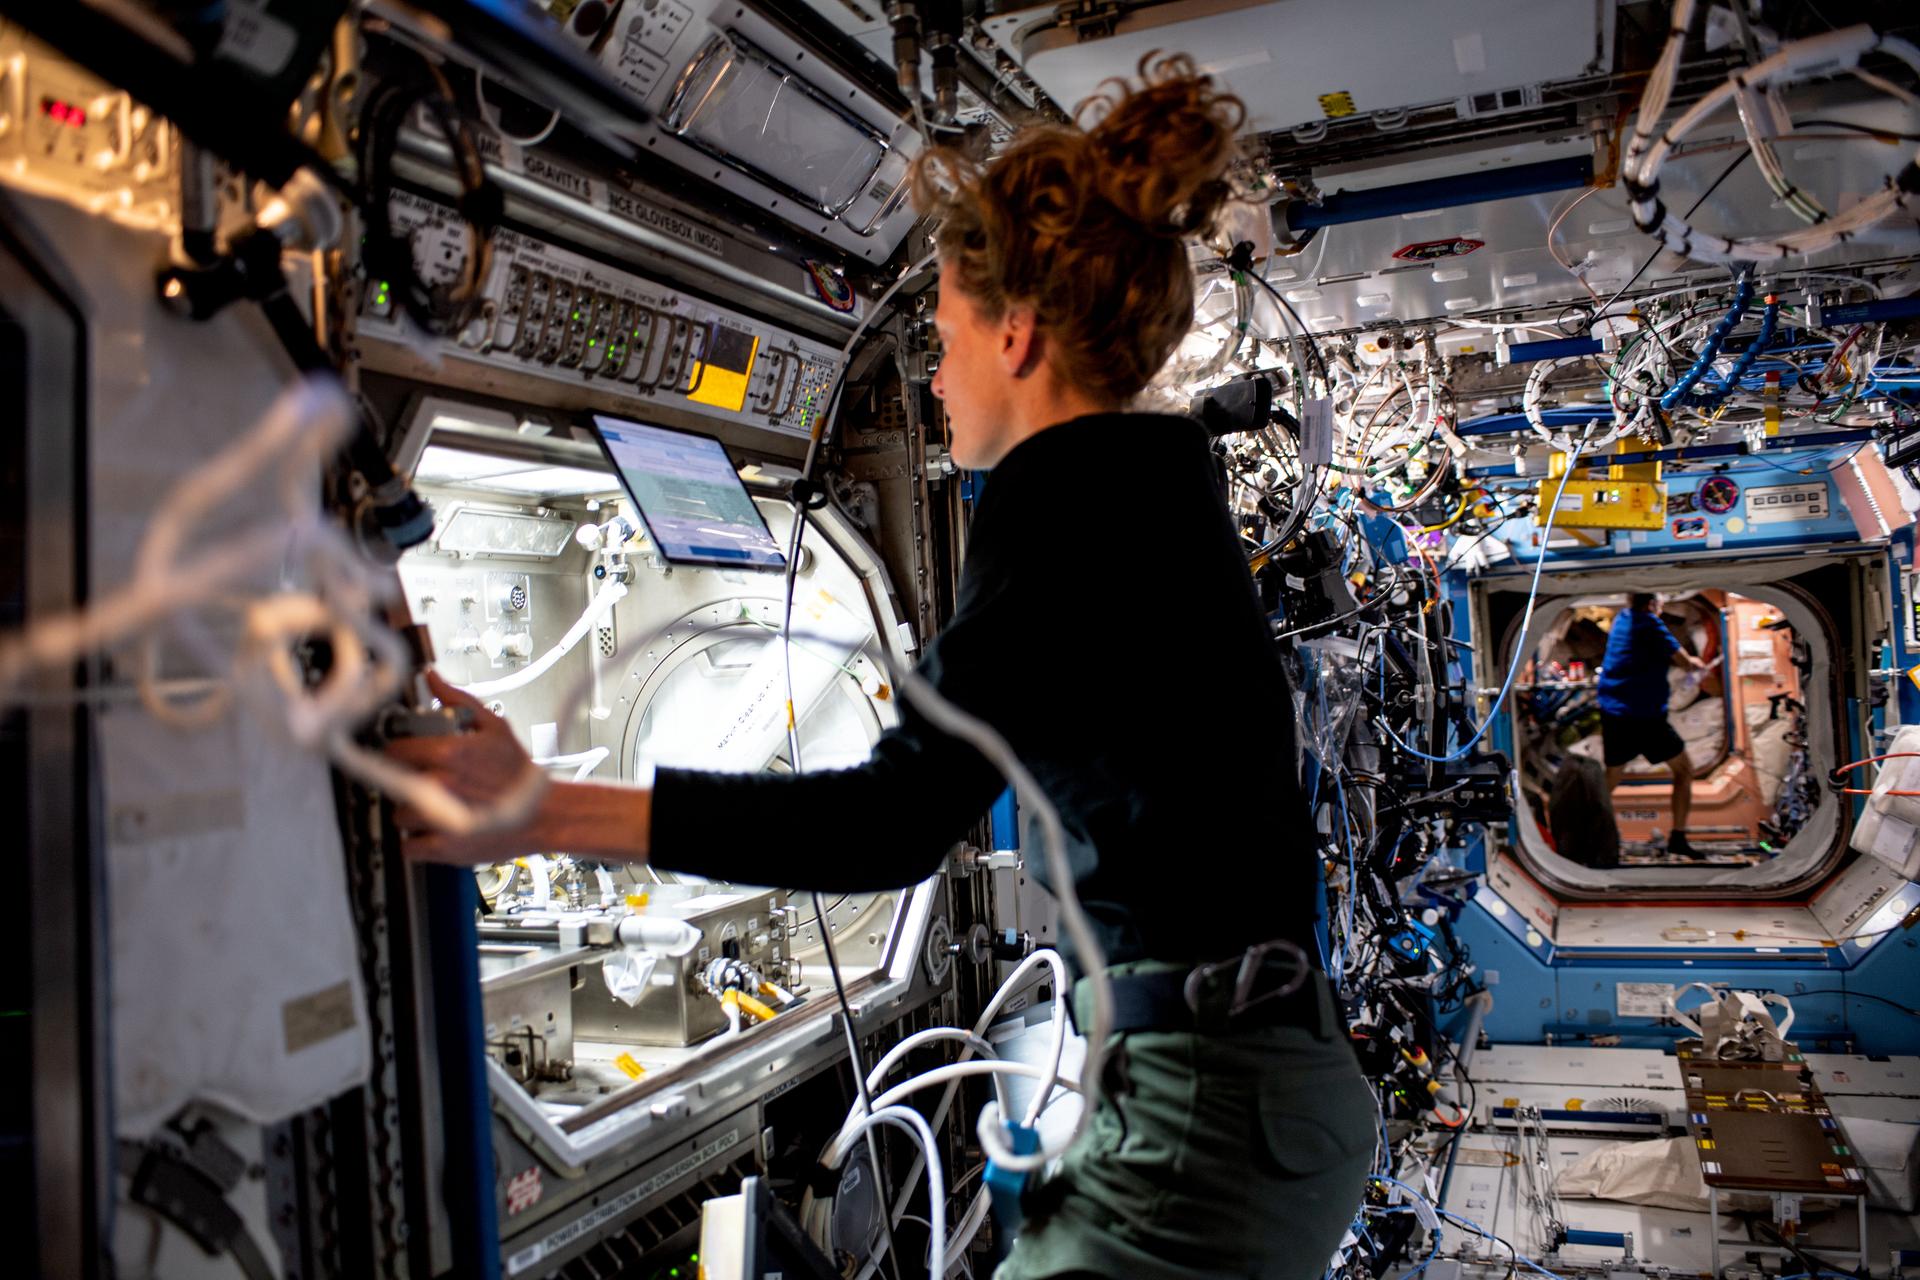 O’Hara is wearing a long-sleeved black shirt and green pants, with her hair in a ponytail. She is standing in front of the open front of a large, lighted module with two silver boxes inside it, each with multiple hoses and connectors. She is looking at a laptop screen at the top of the module and holding on to the edge of the hardware with her left hand.